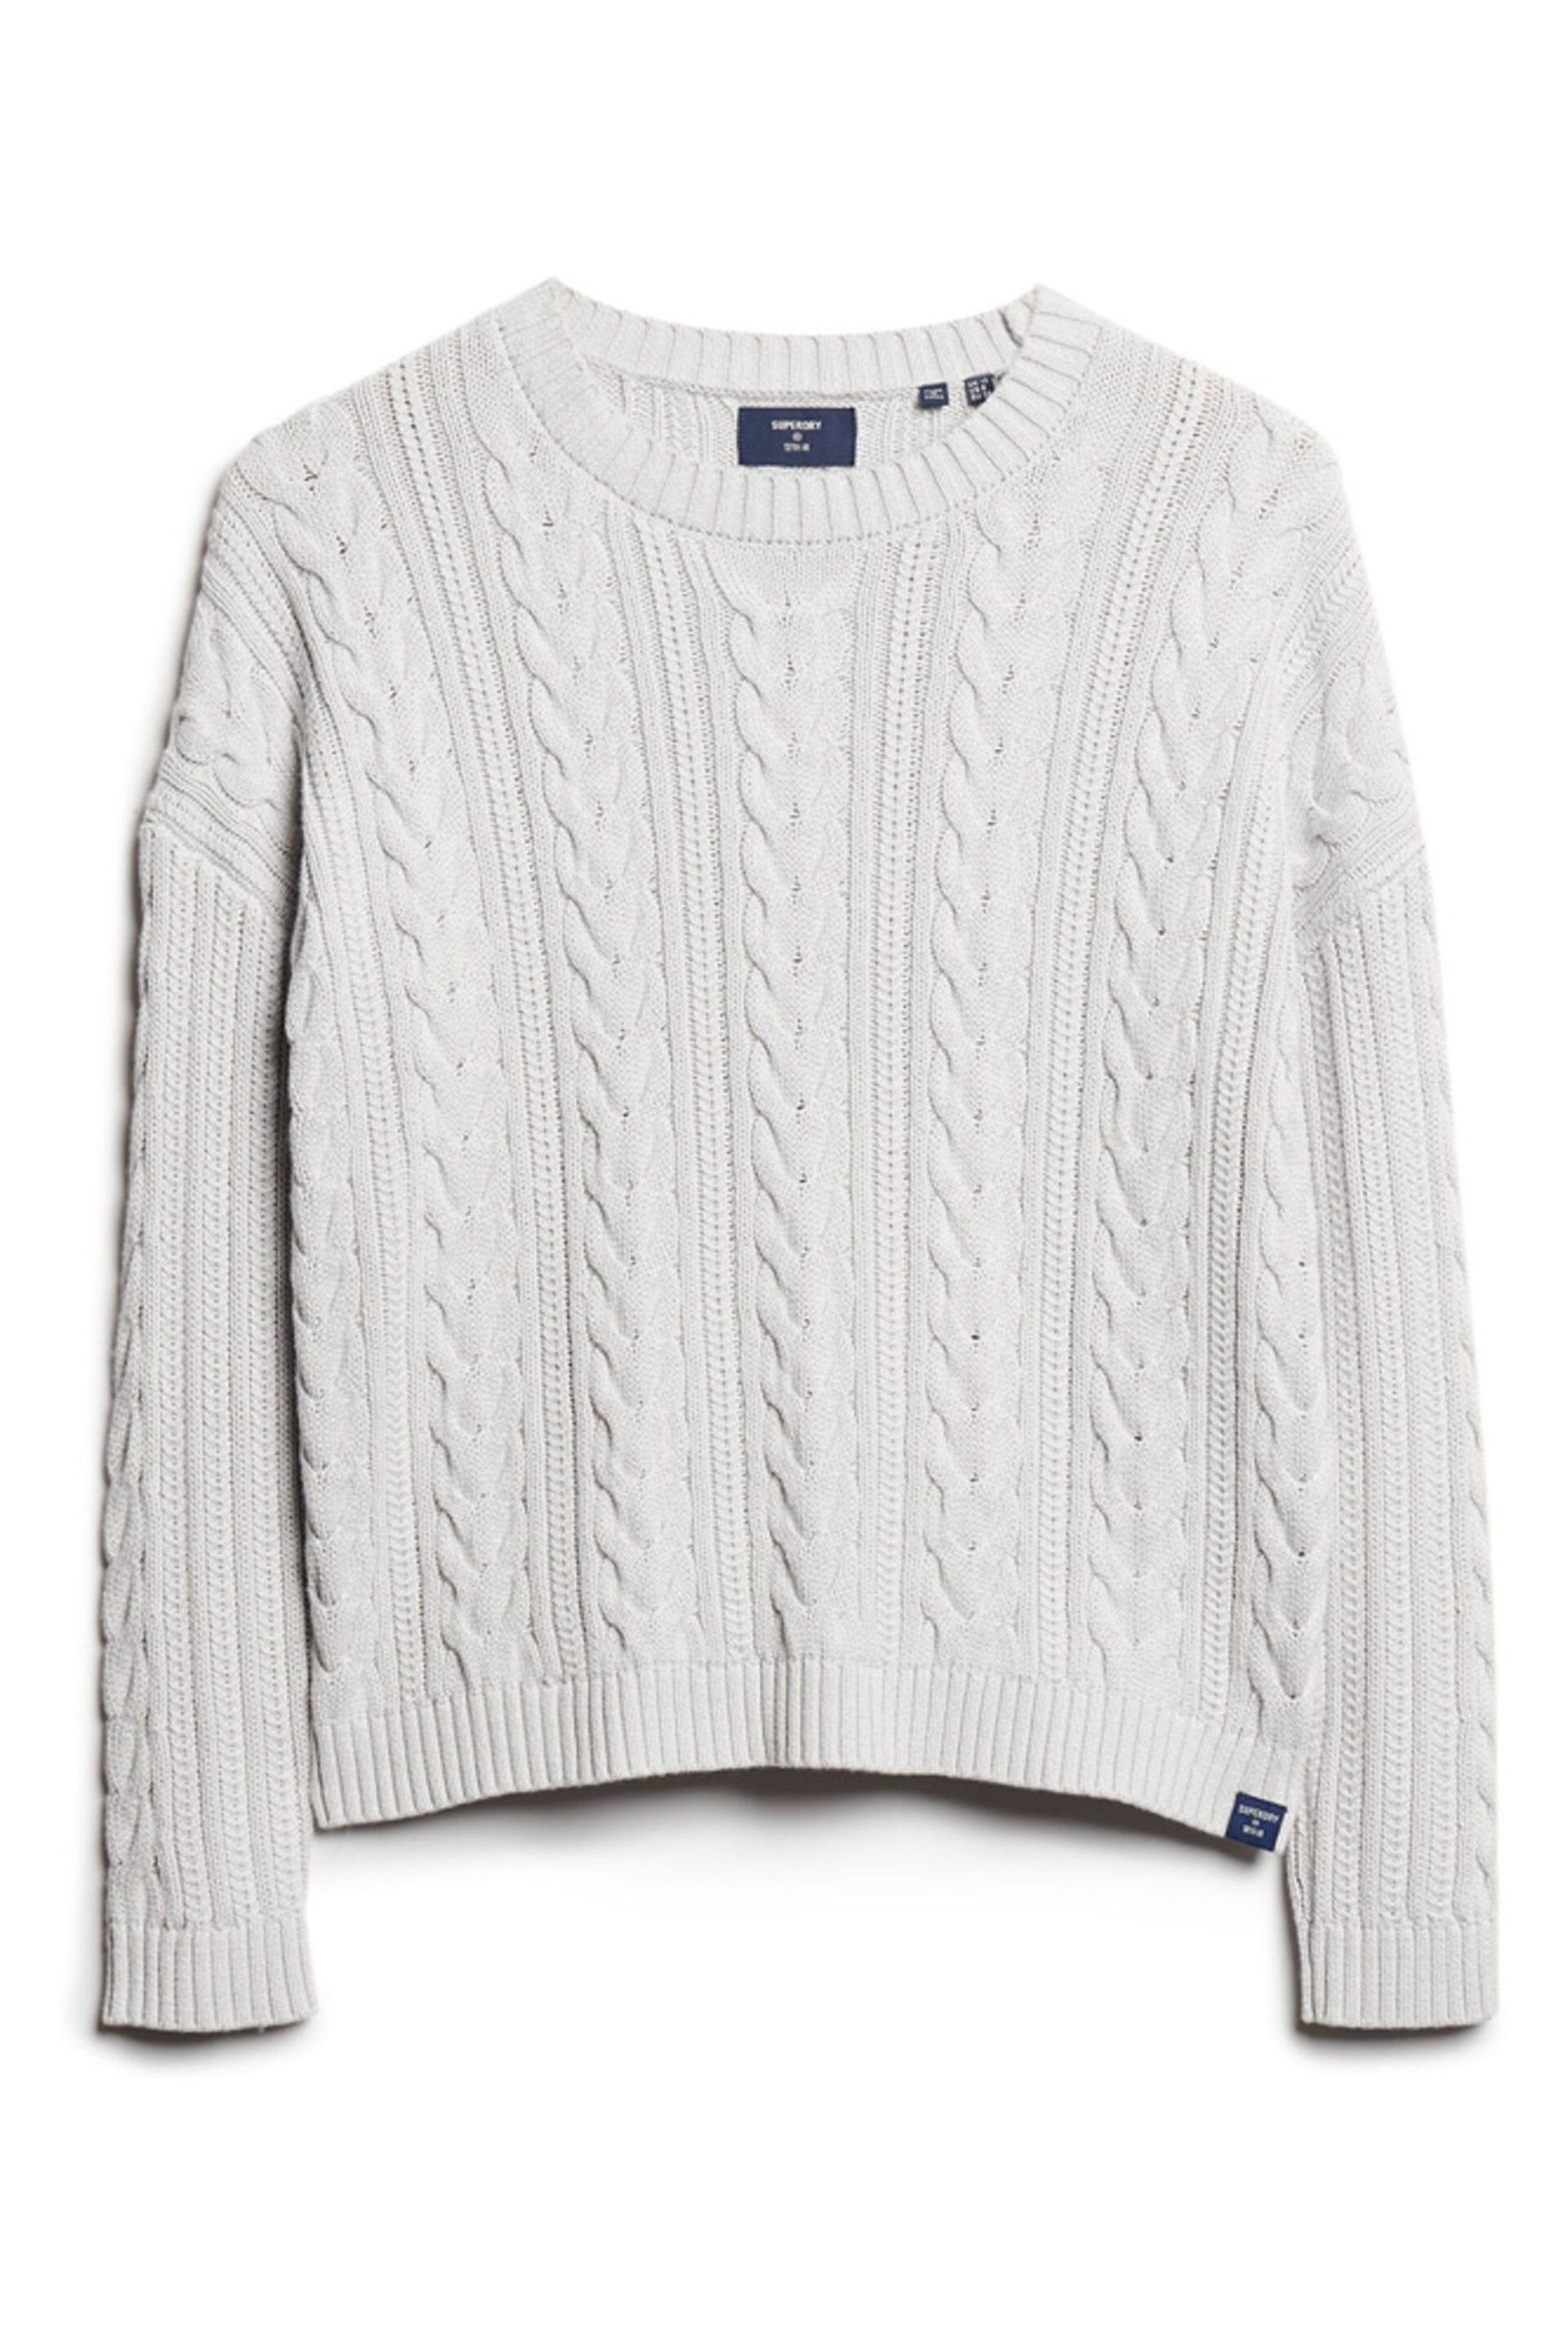 Superdry Grey Dropped Shoulder Cable Crew Jumper - Image 4 of 6